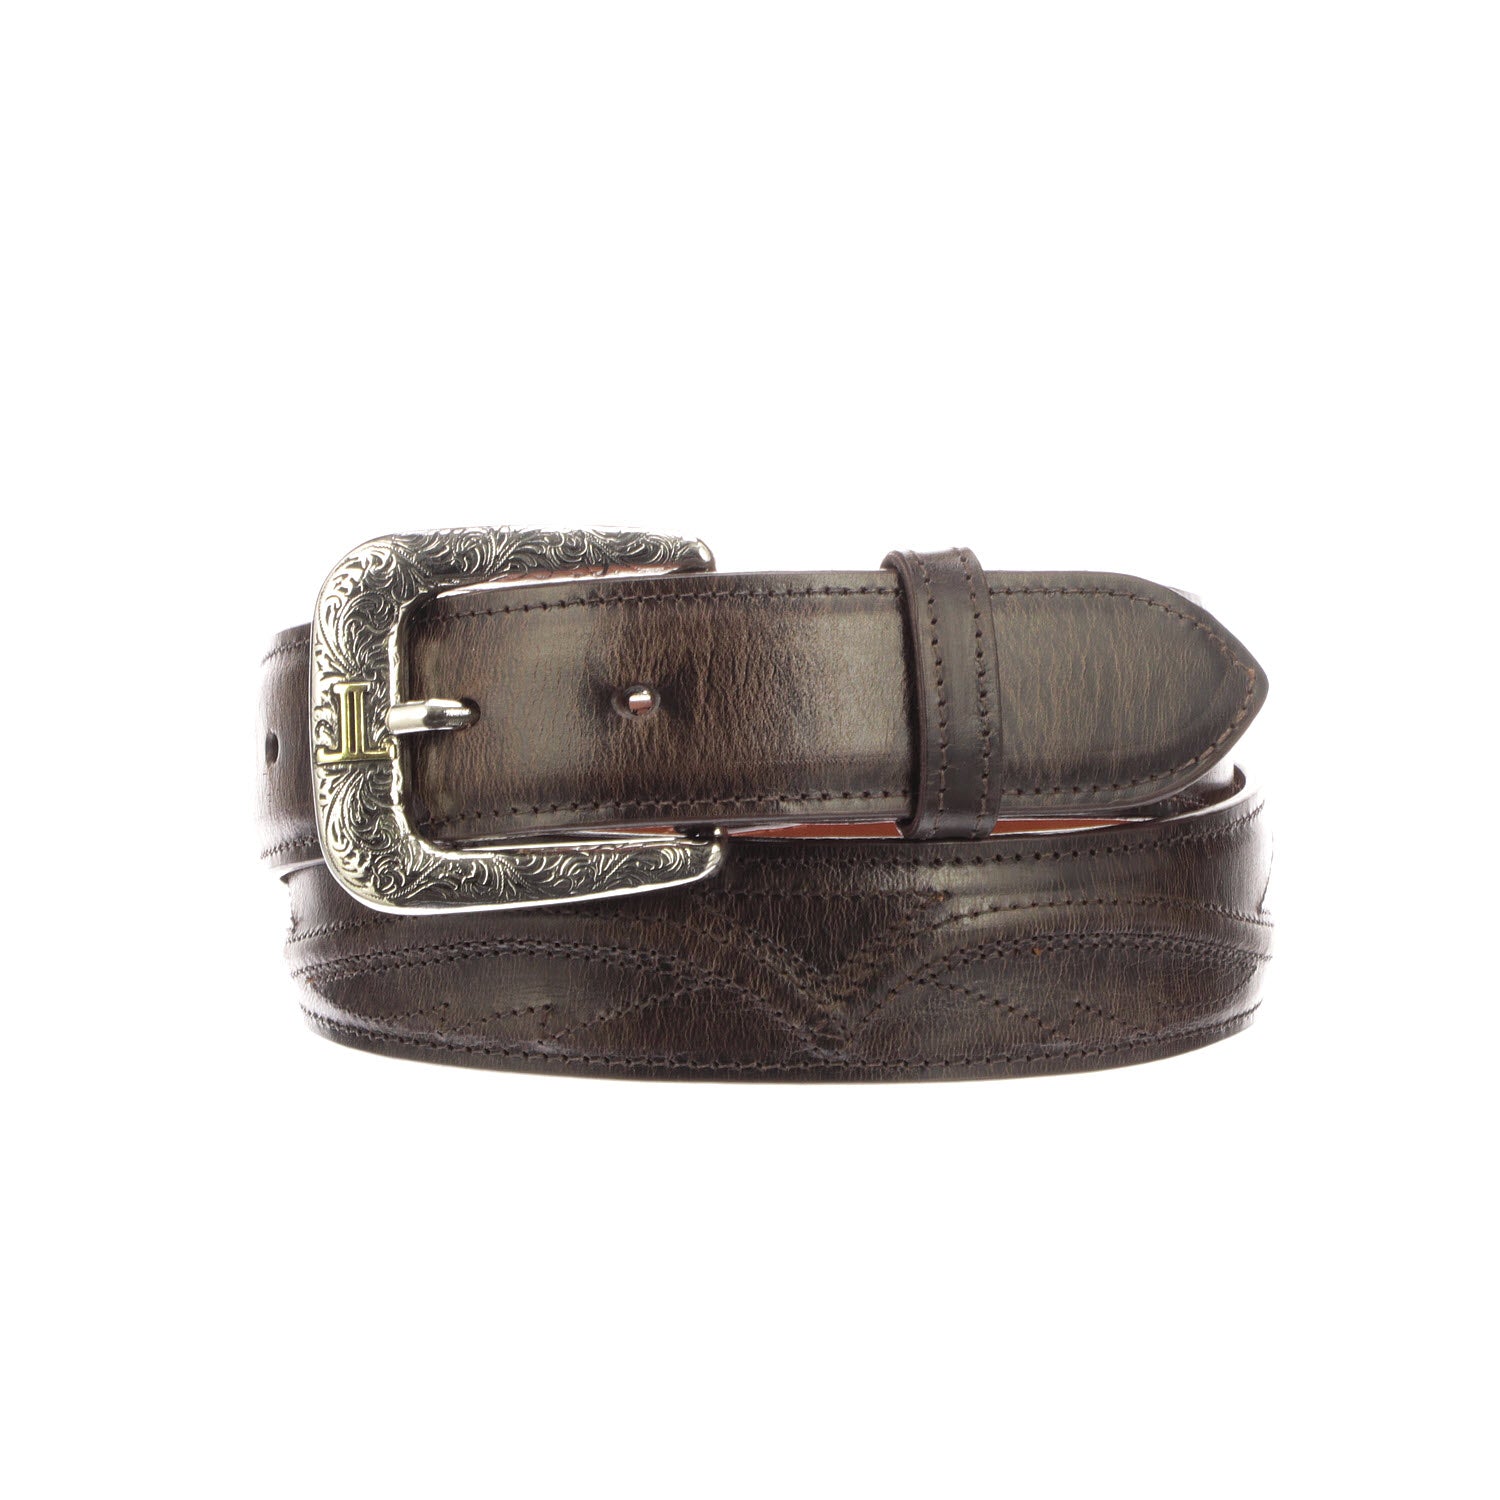 Vegetable tanned men's leather Louis belt with square buckle – Le Tanneur